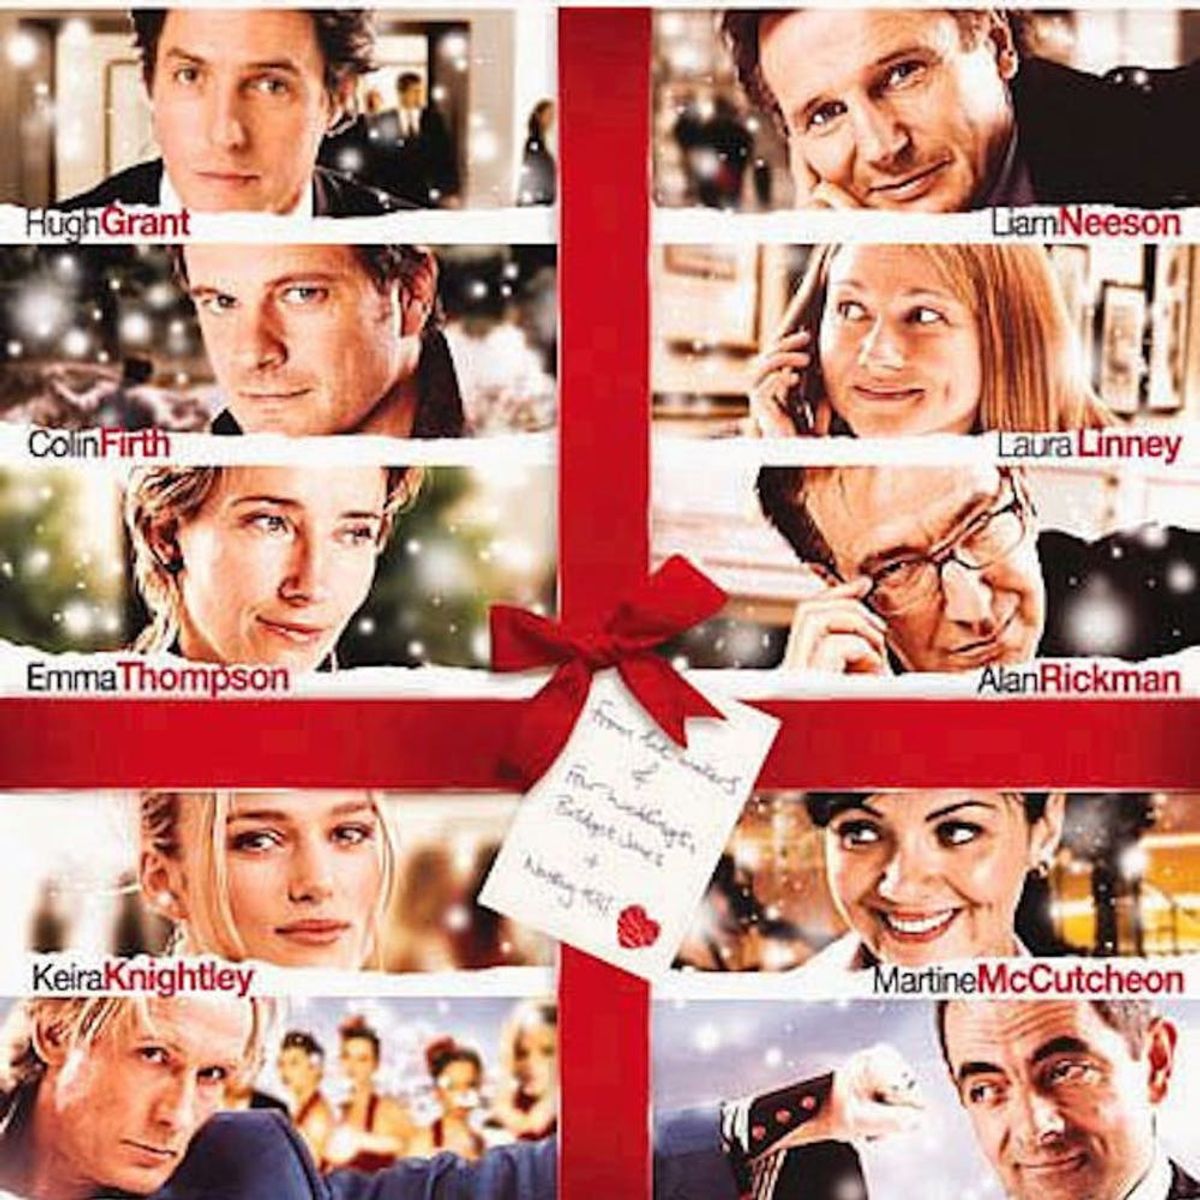 The First Love Actually Reunion Movie Pics Will Give You ALL of the Feels